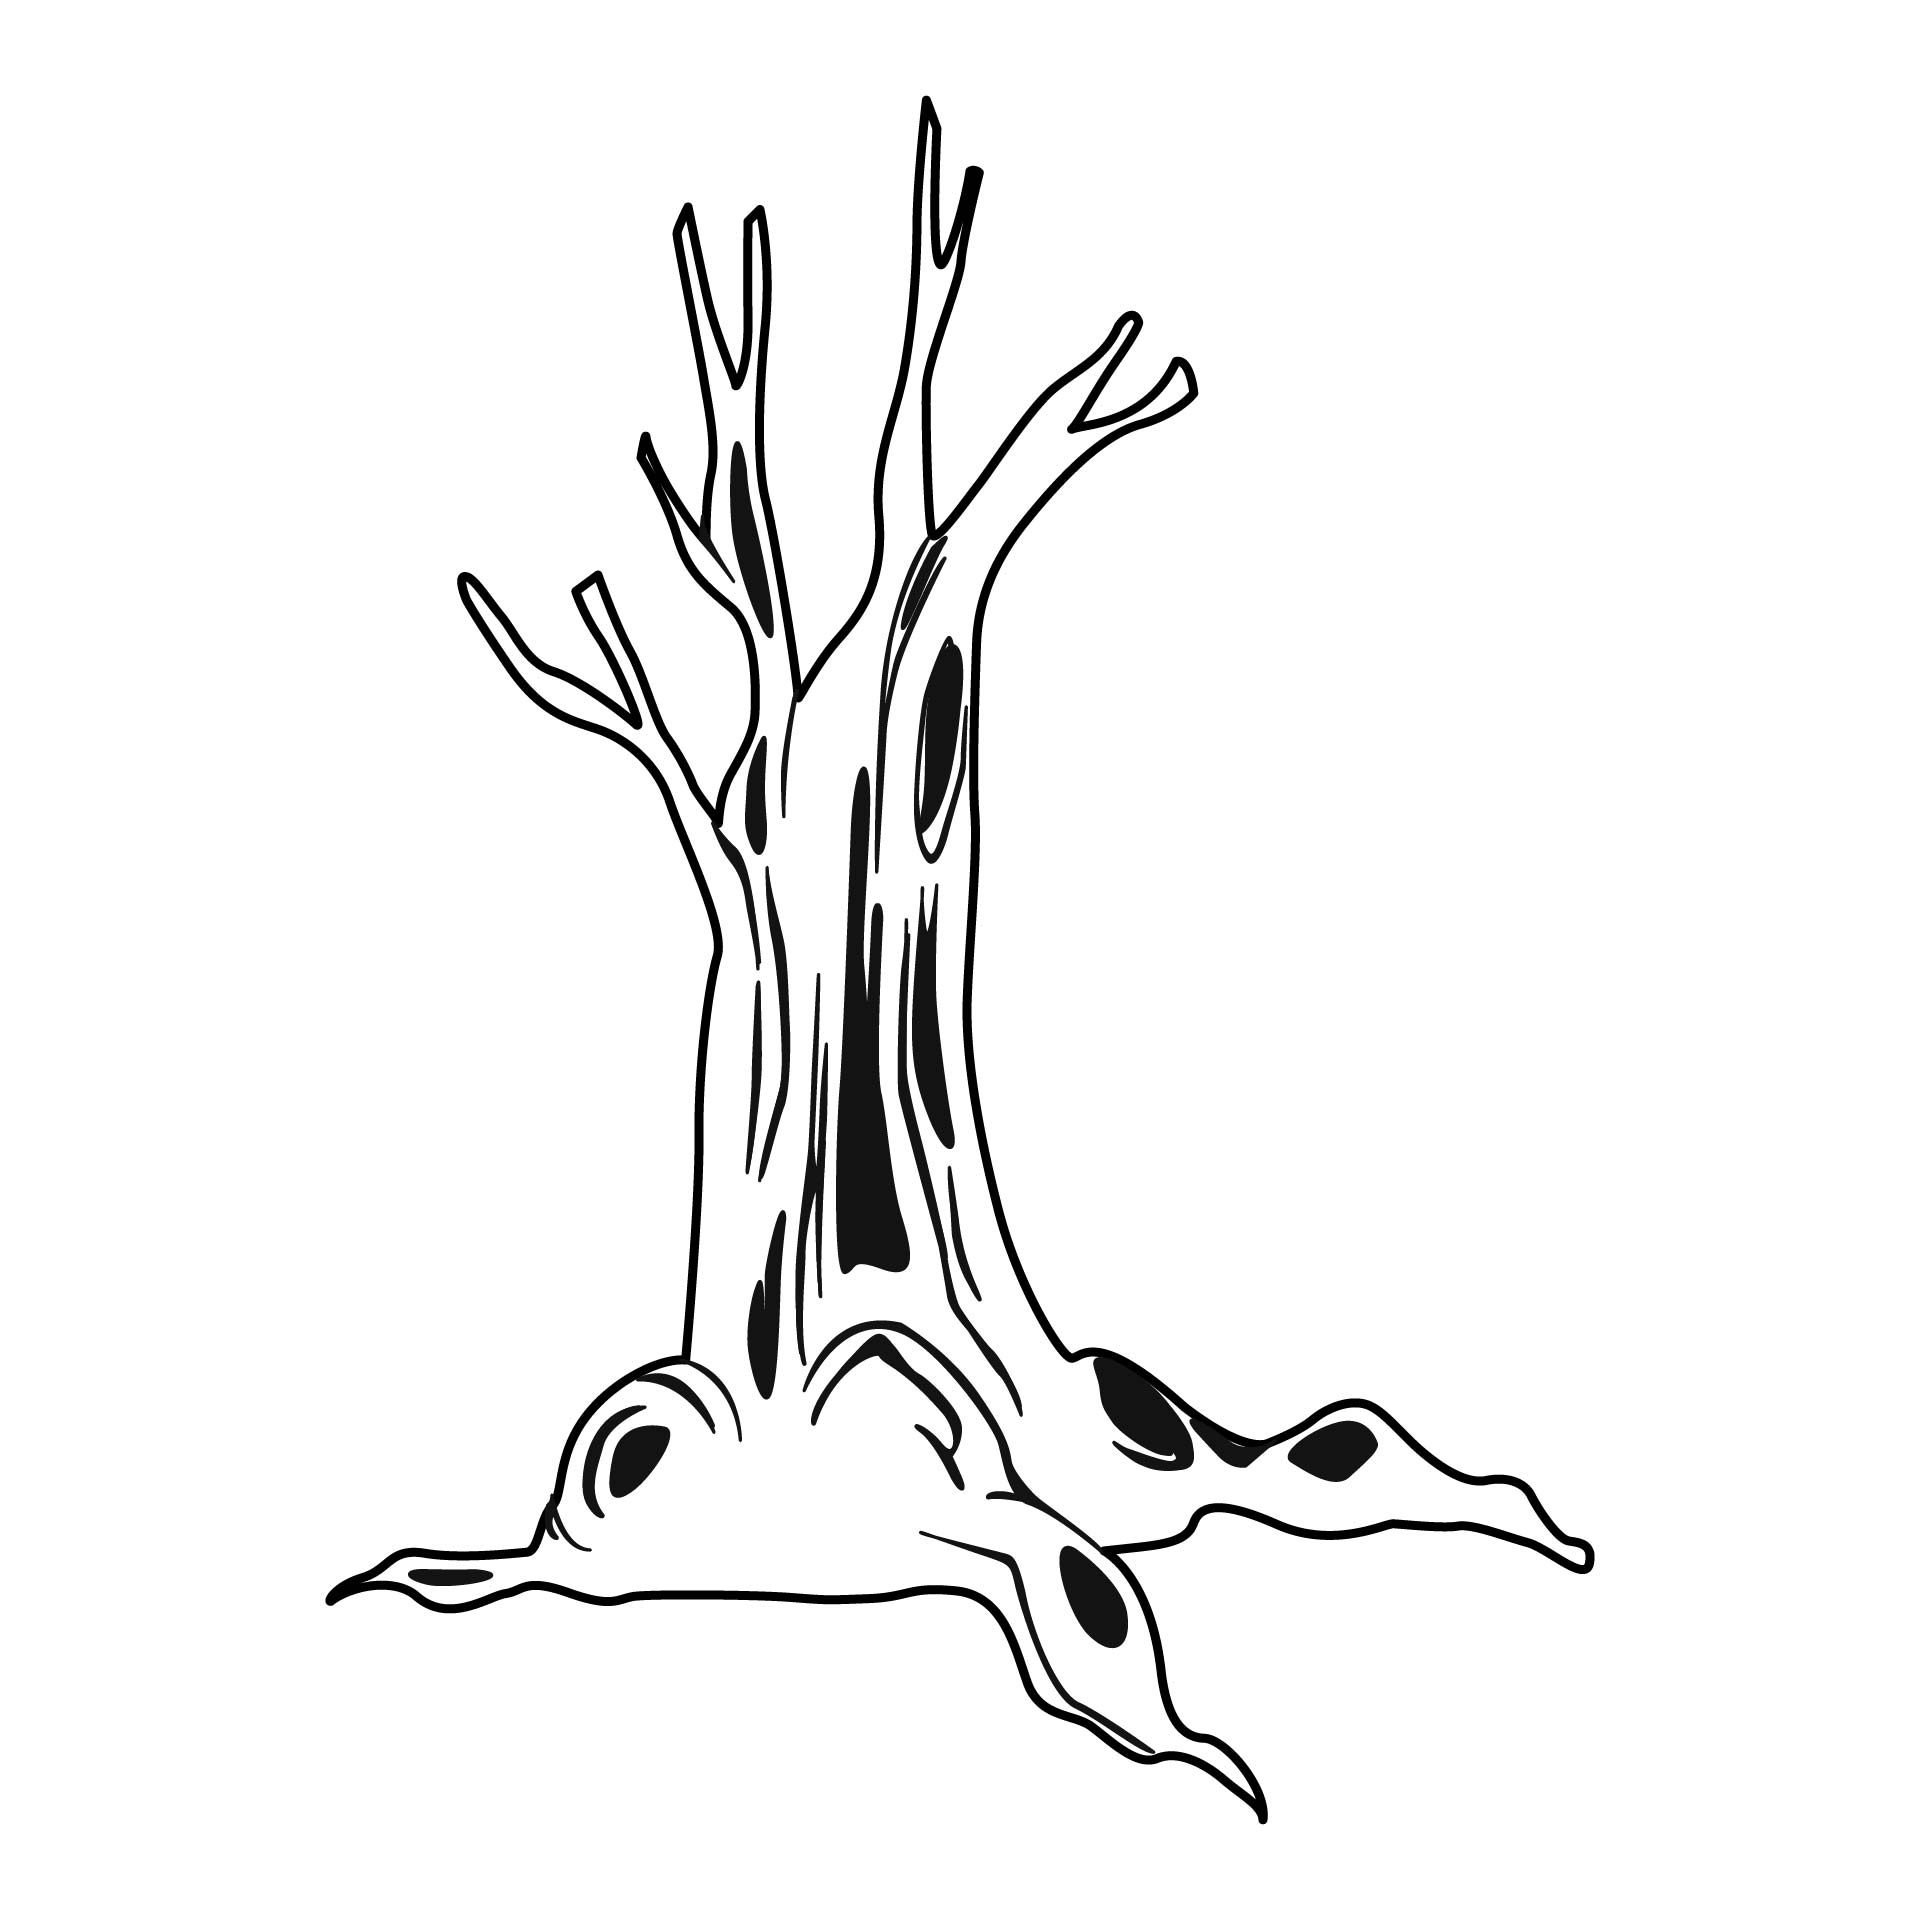 Printable Tree Trunk Outline